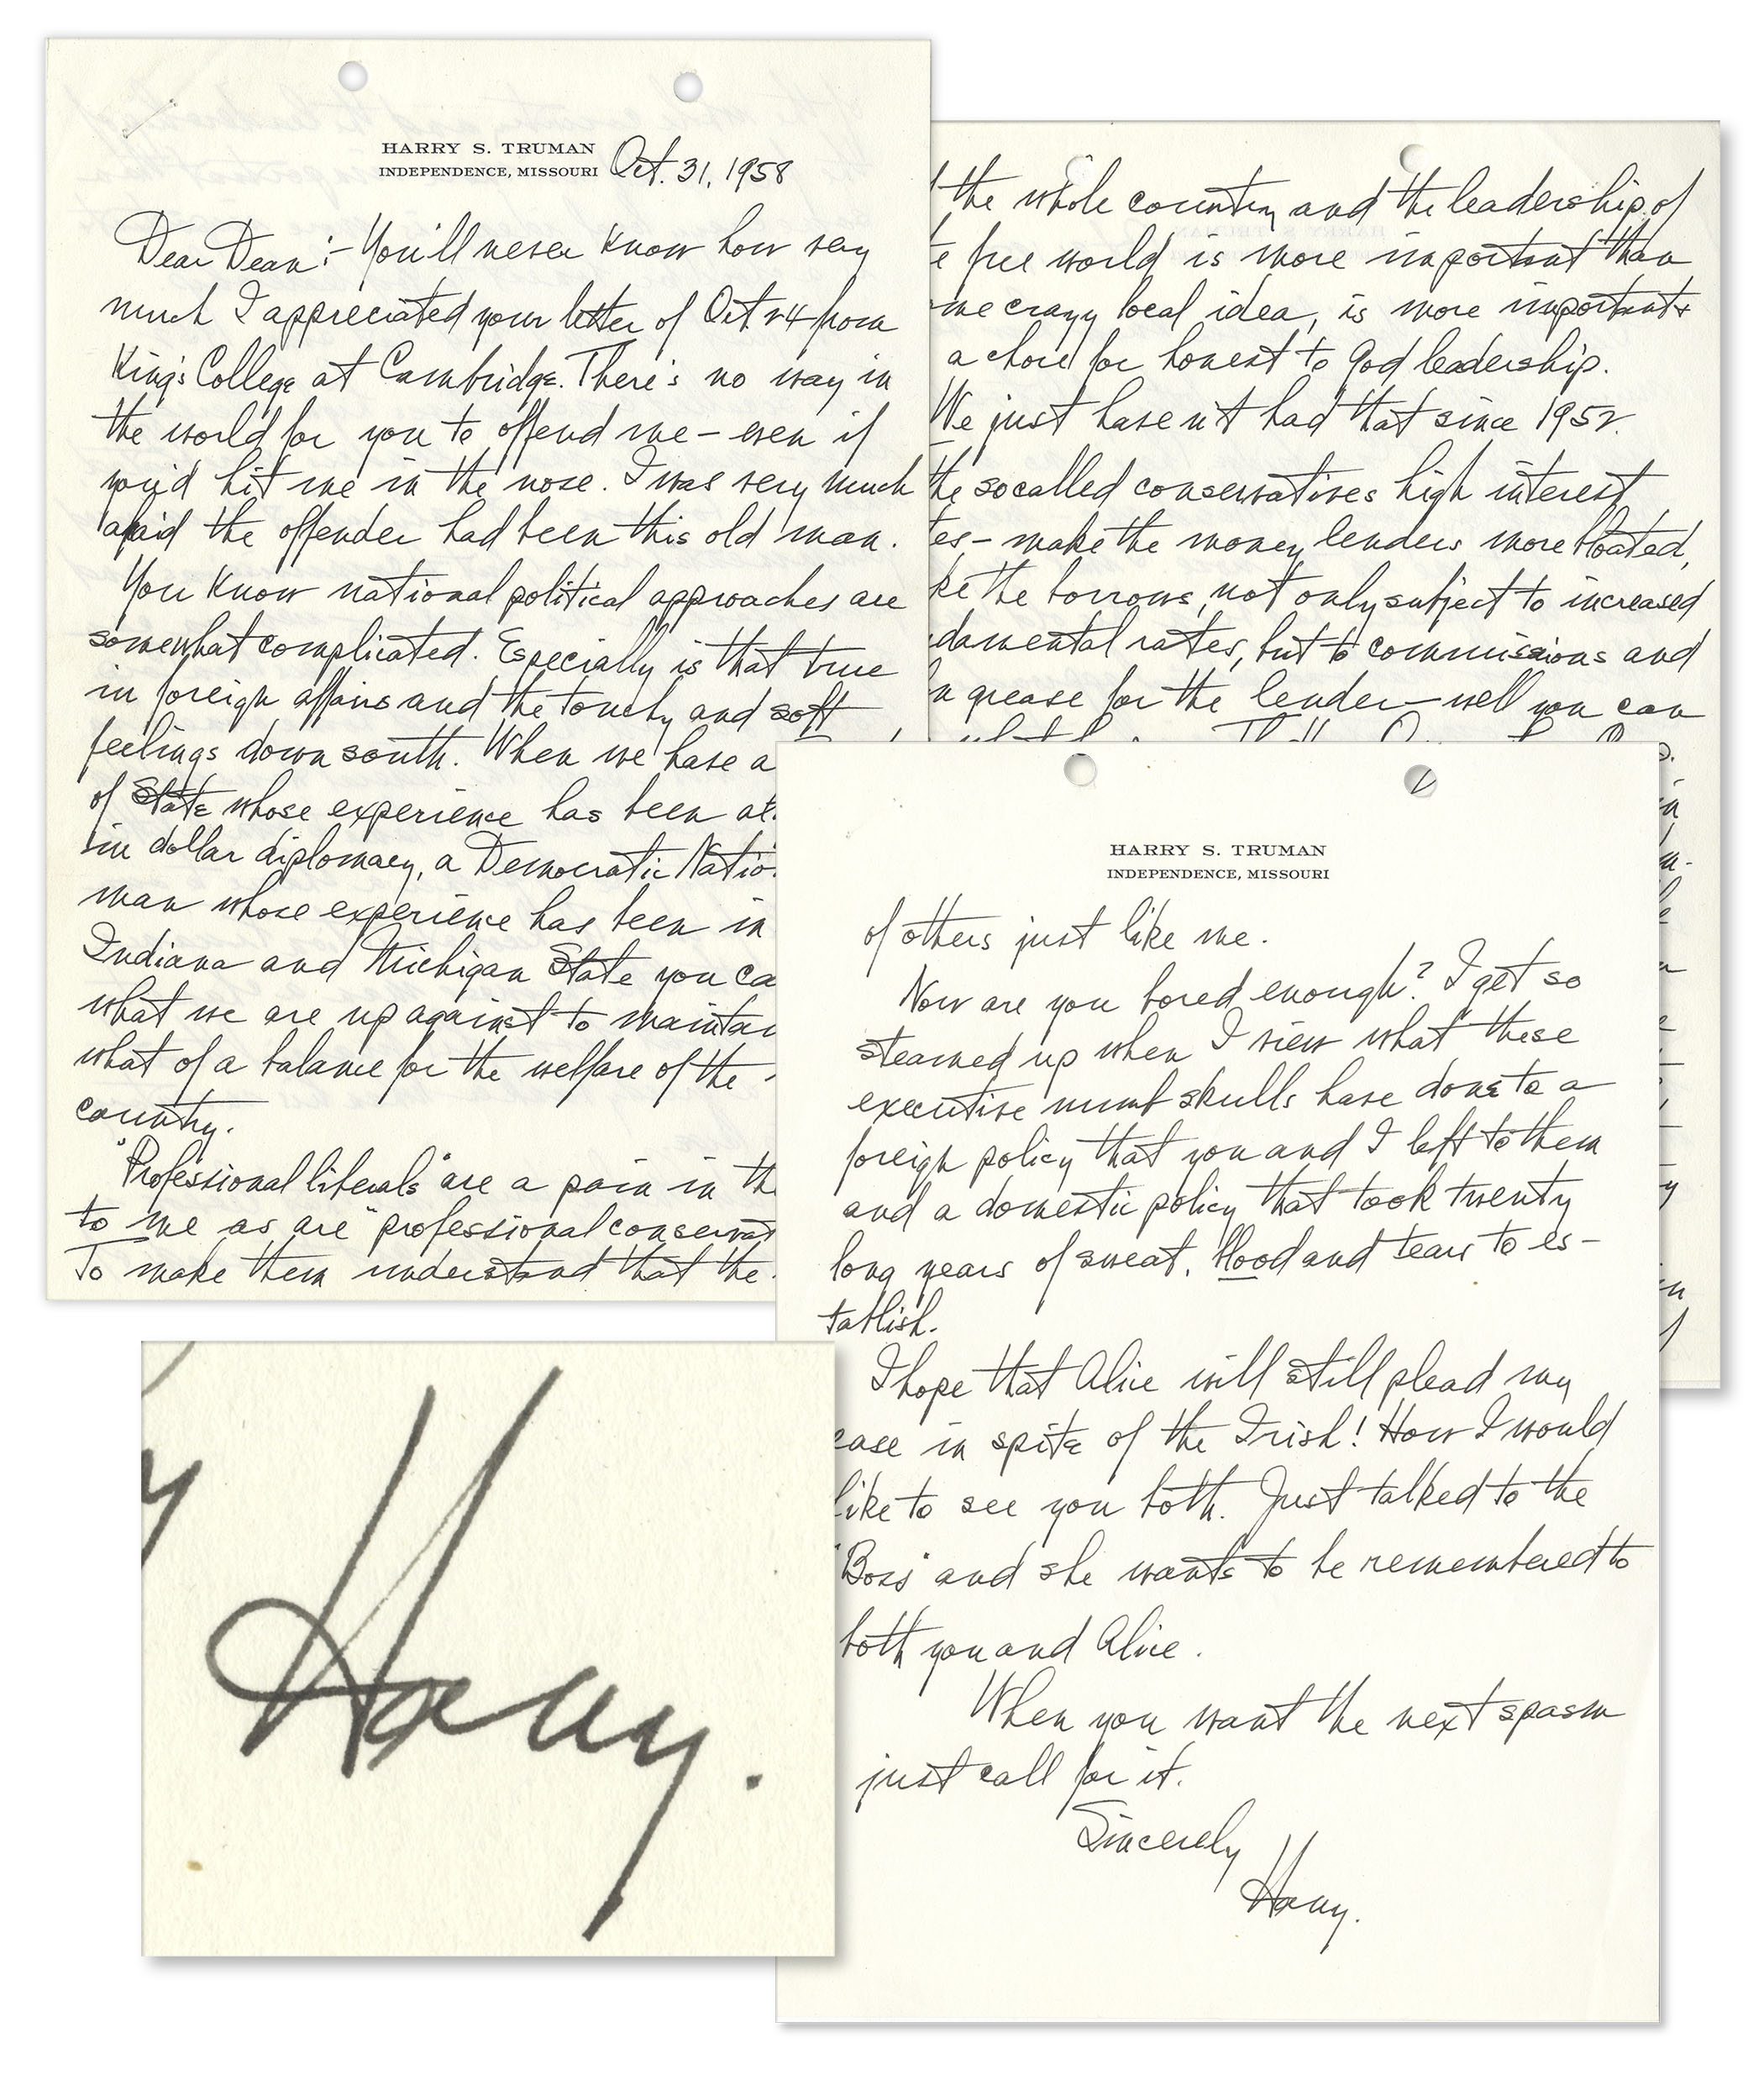 Harry Truman Memorabilia Fantastic, Fiery Harry Truman ALS, to Dean Acheson in 1958 -- ''...I get so steamed up when I view what these executive numb skulls have done to a foreign policy that you and I left to them...''